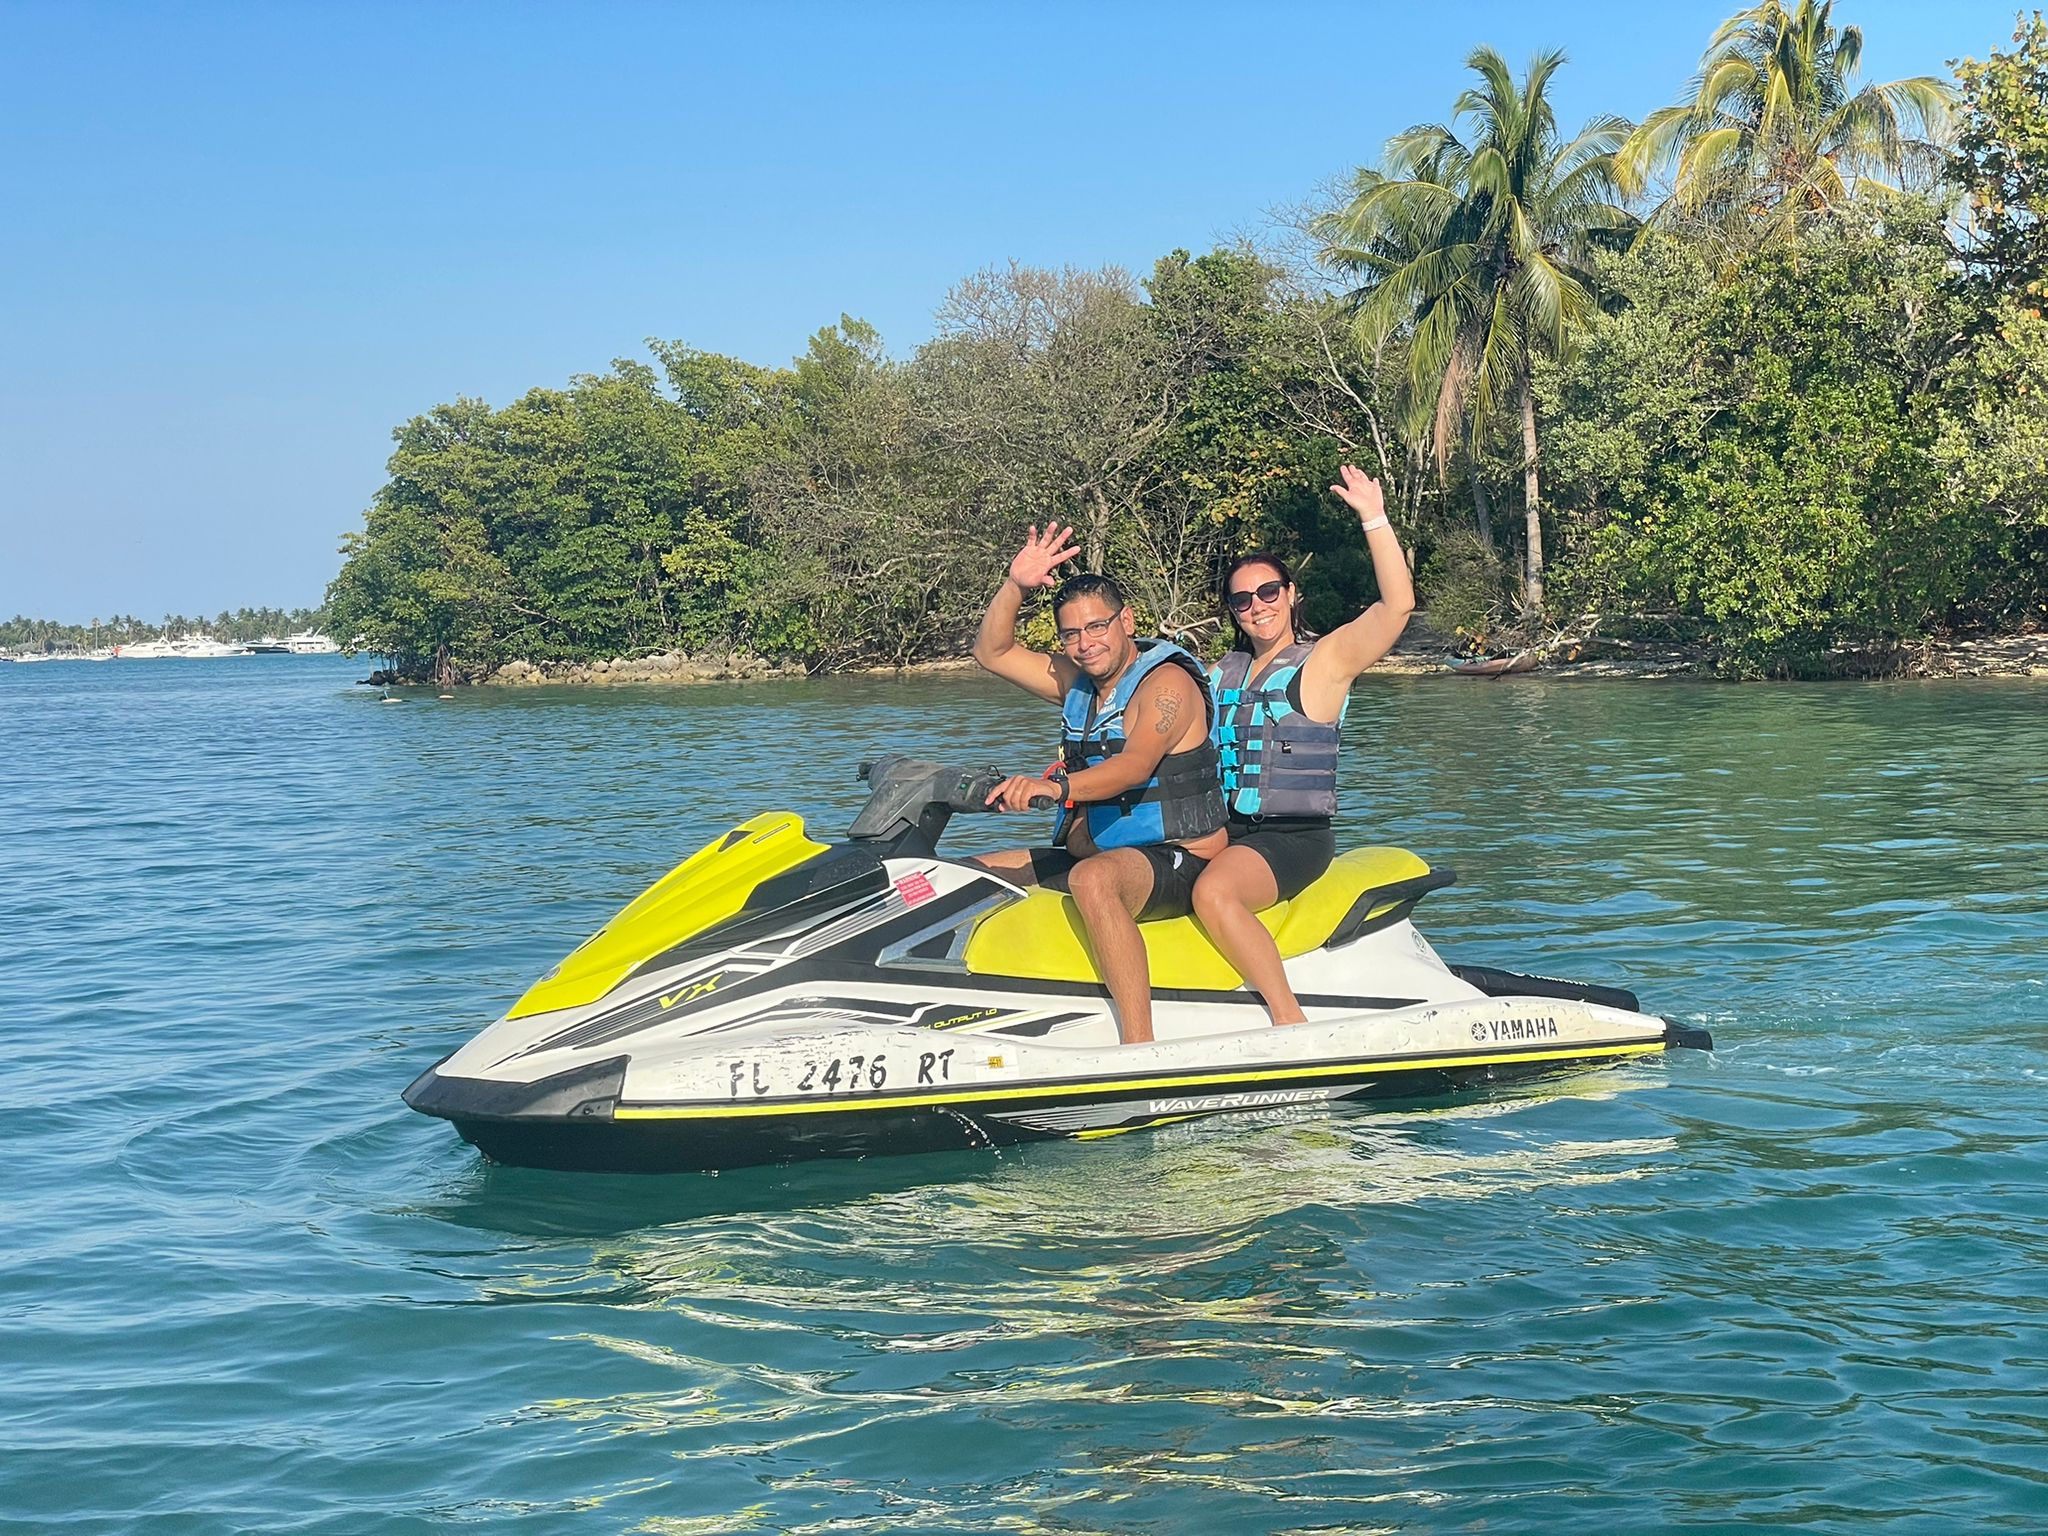 How to Choose the Right Jet Ski for Your Miami Beach Adventure